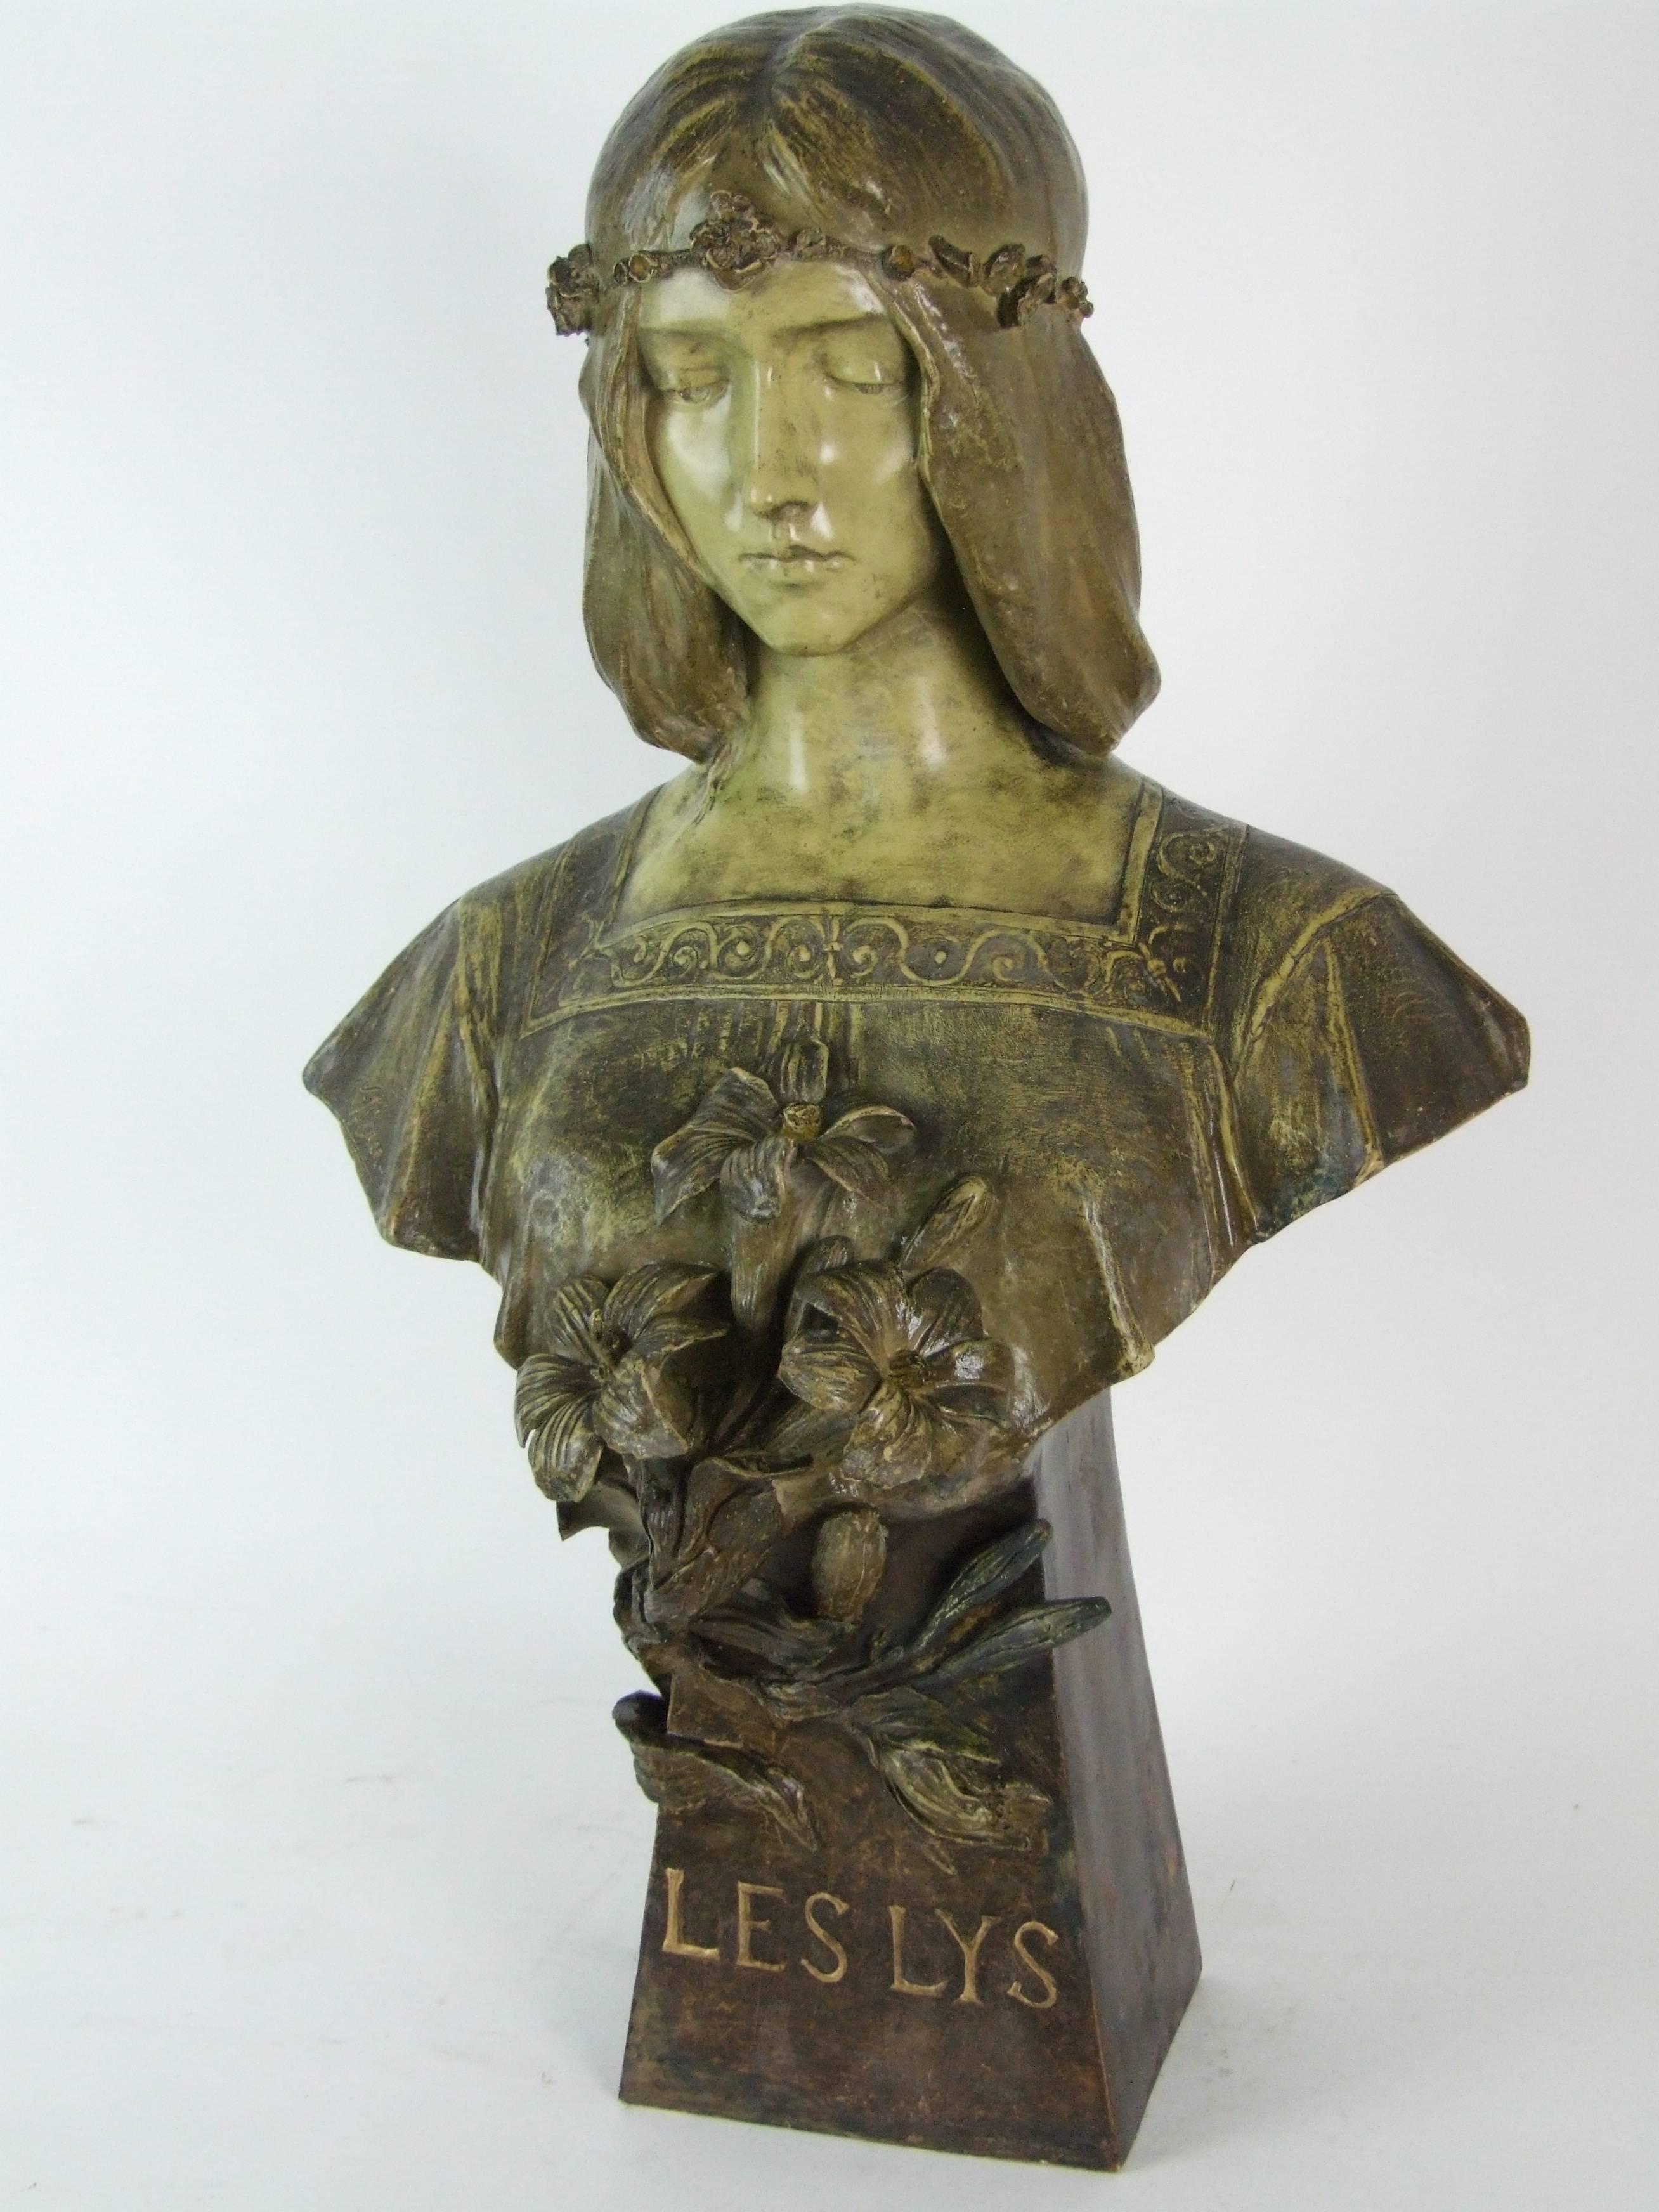 Life size bust by Goldscheider. 
Austrian terracotta Art Nouveau life size bust by Goldscheider. Her title is Purete and she can be seen in the Goldscheider books, on page 54 of the Pinas book. To the base is Les Lys (The Lillies), her model number